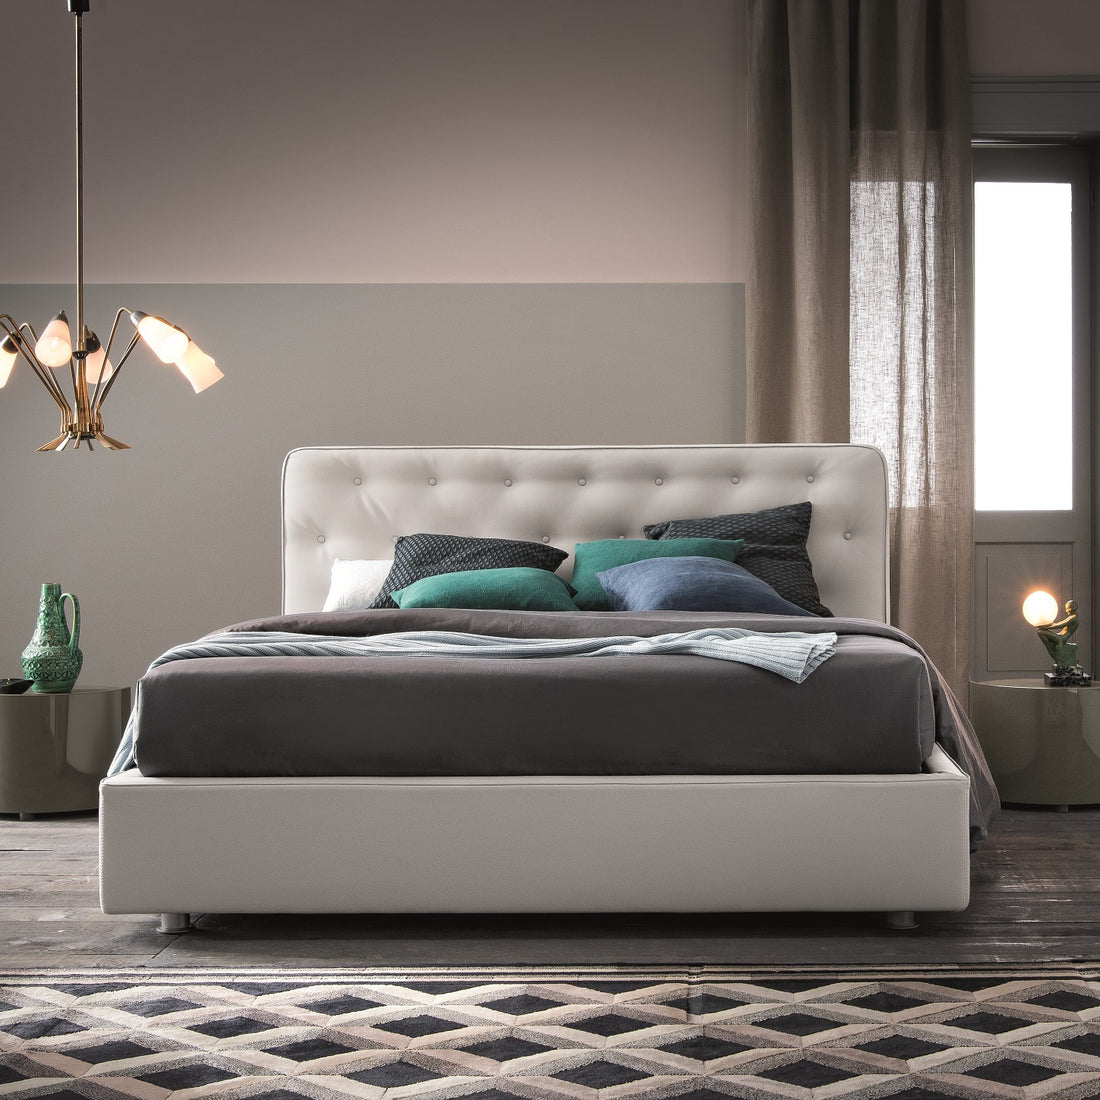 Style your Bedroom with Modern Furniture Pieces